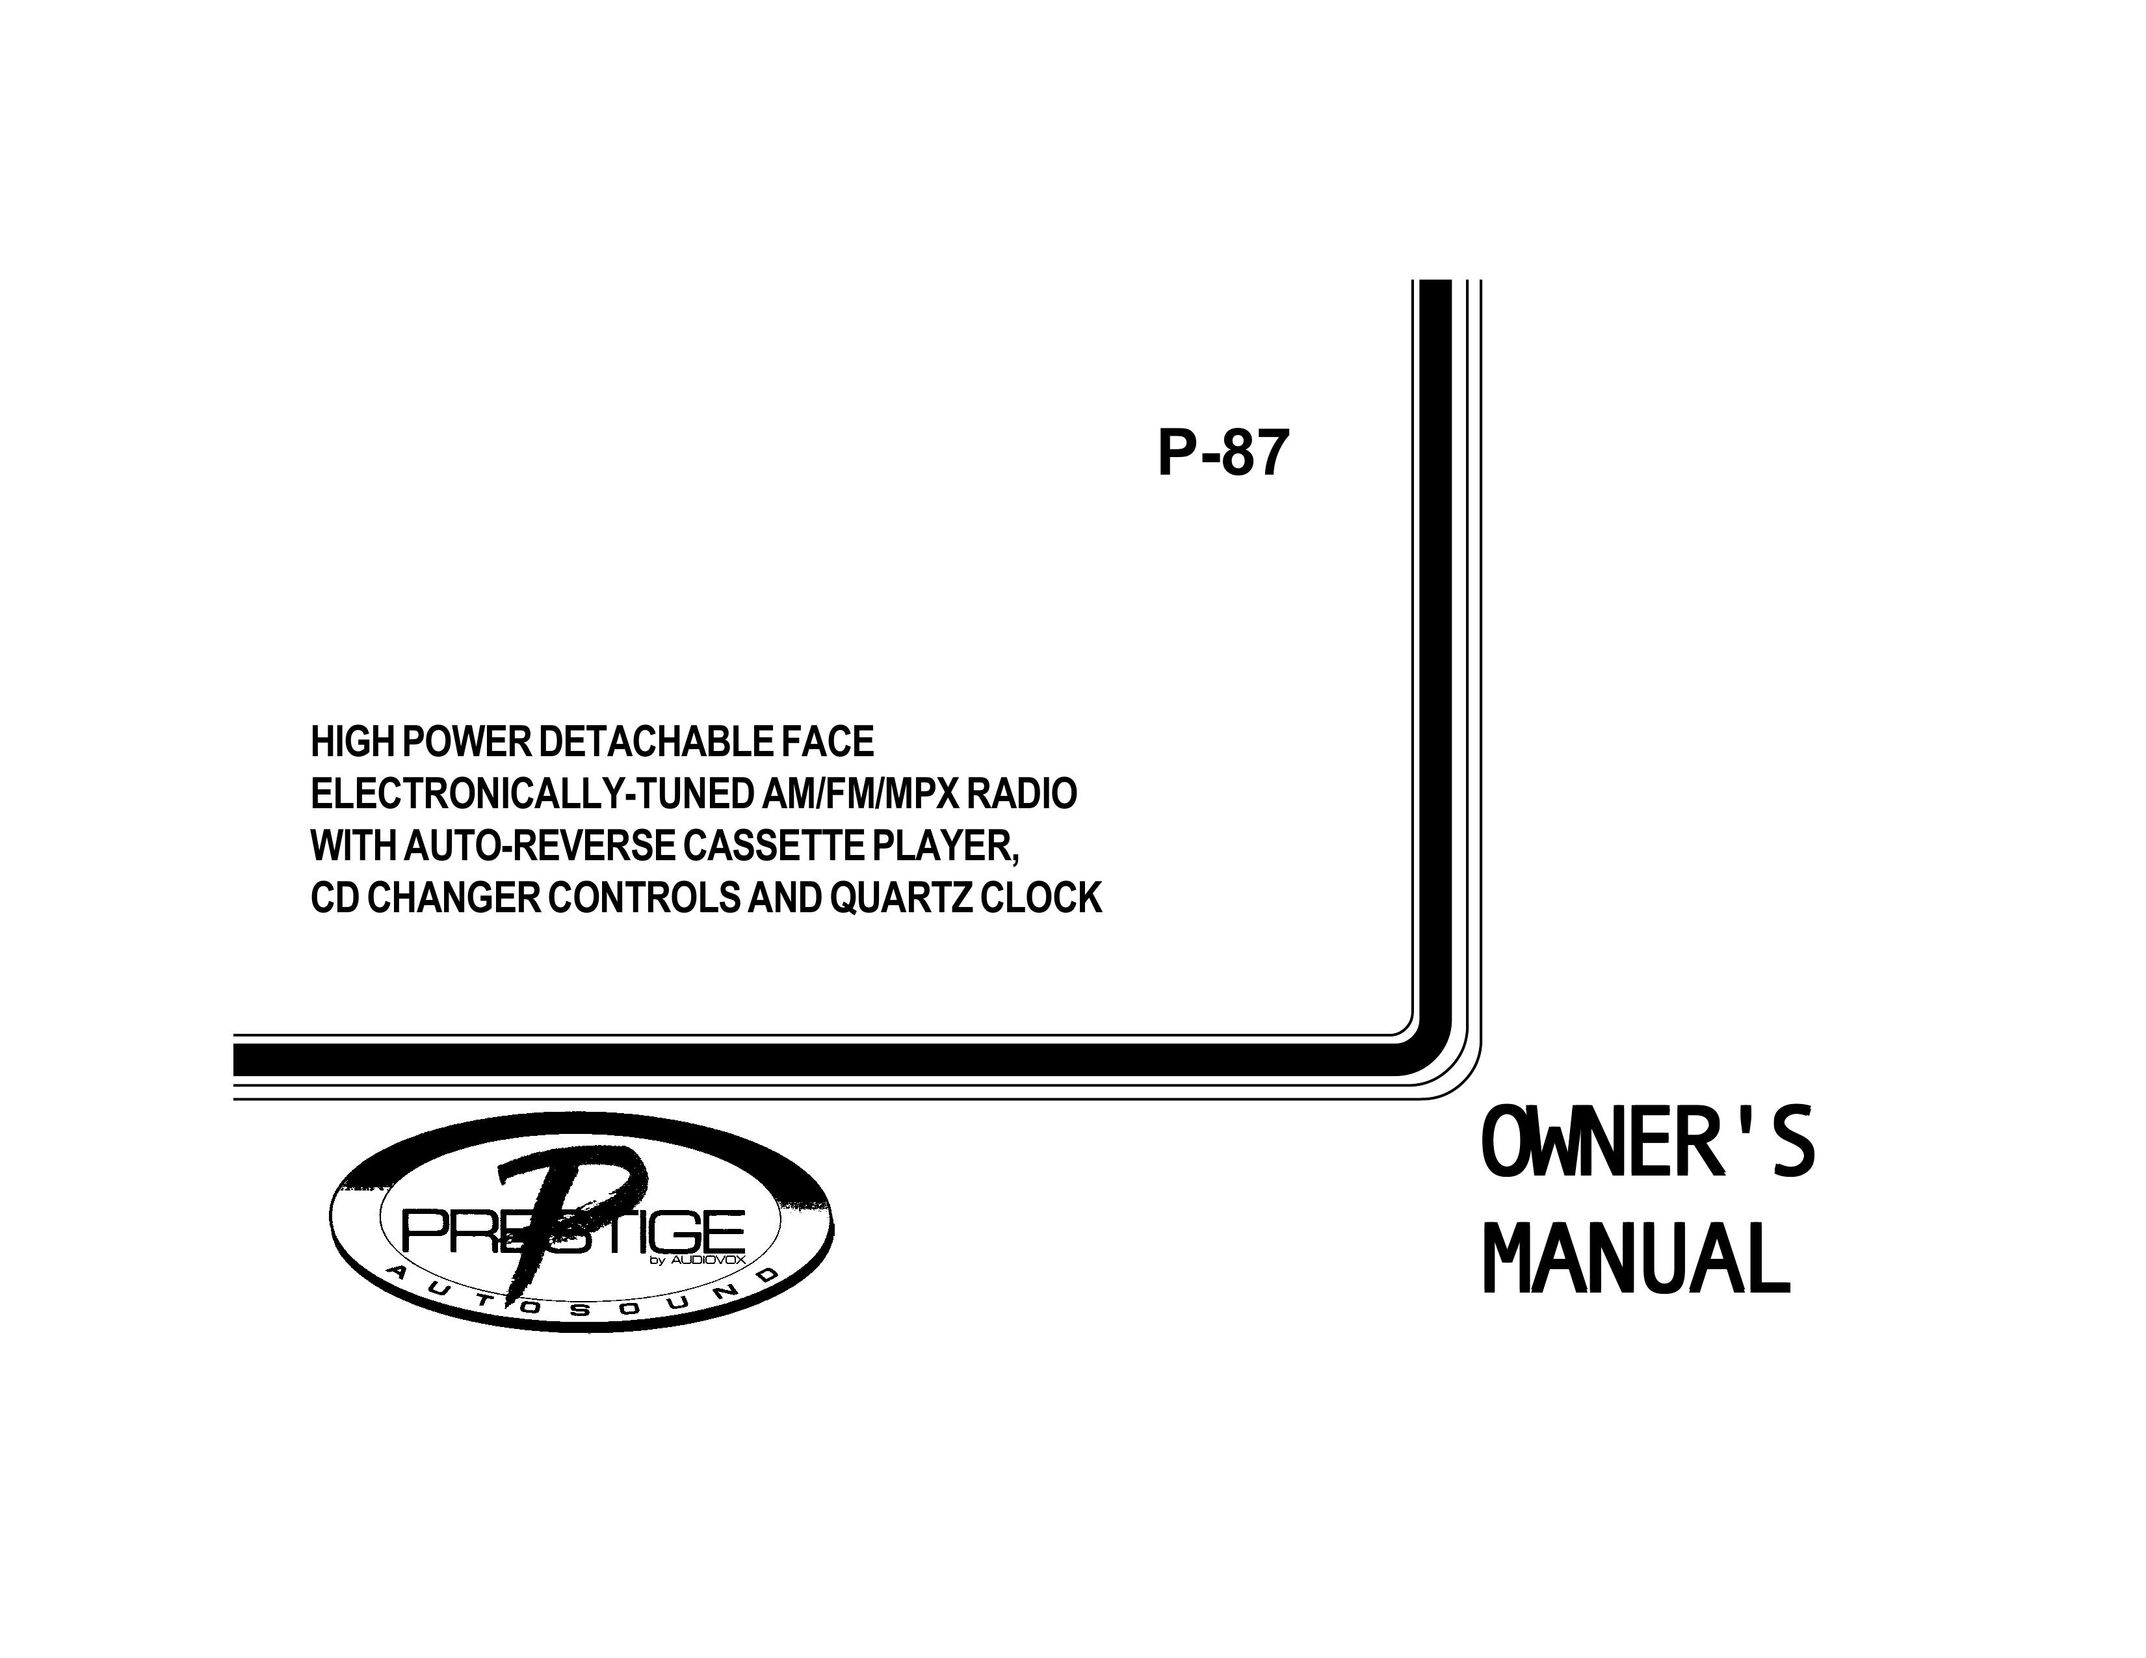 Audiovox P-87 Stereo System User Manual